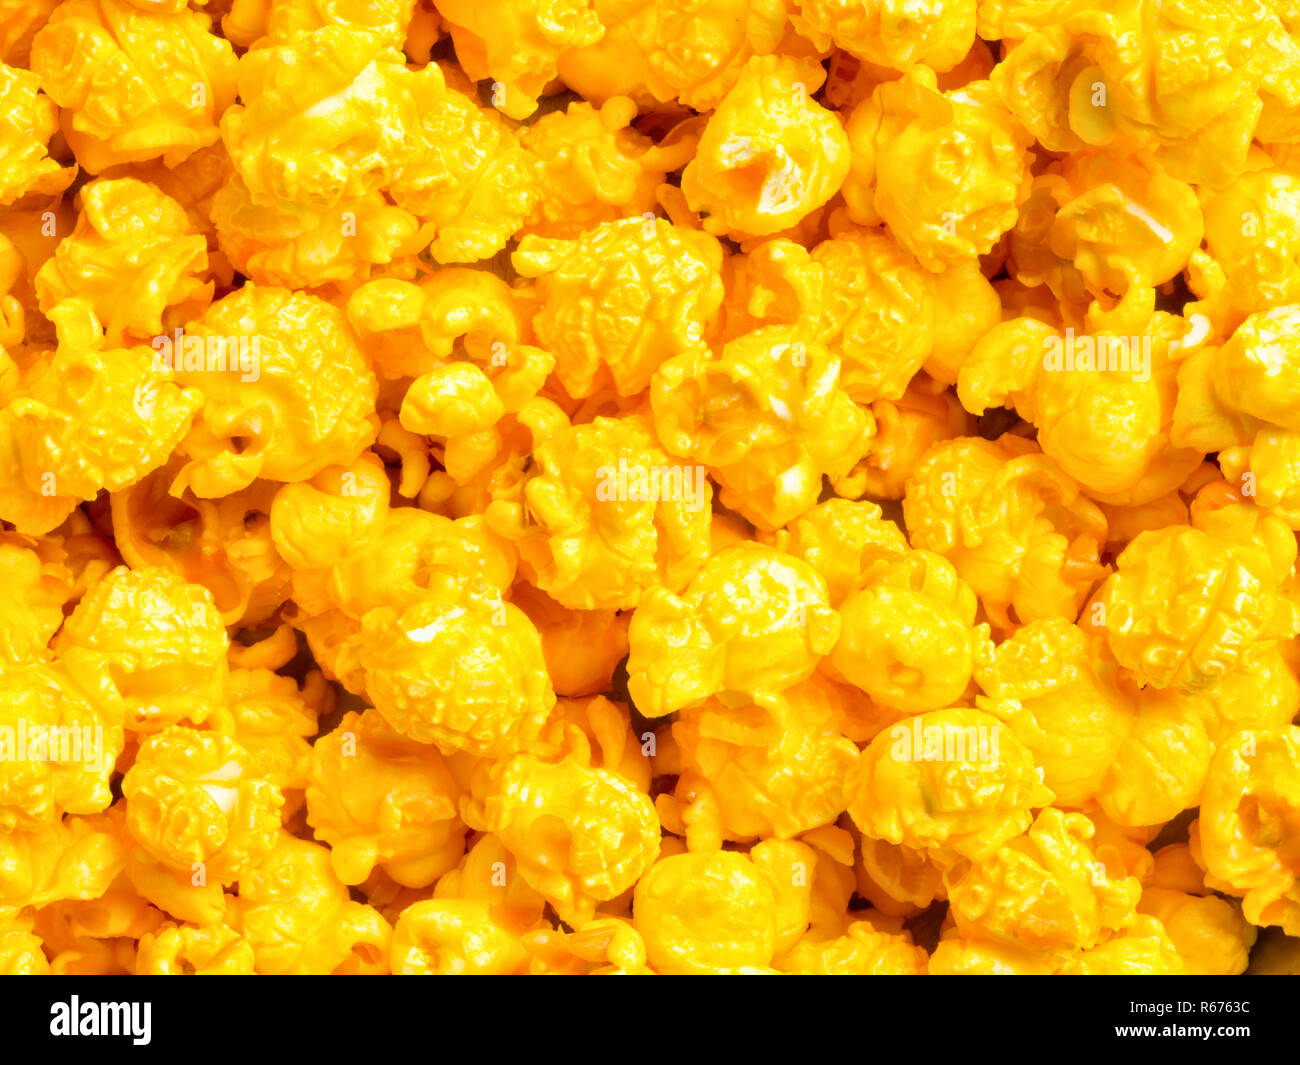 golden cheese popcorn food background Stock Photo